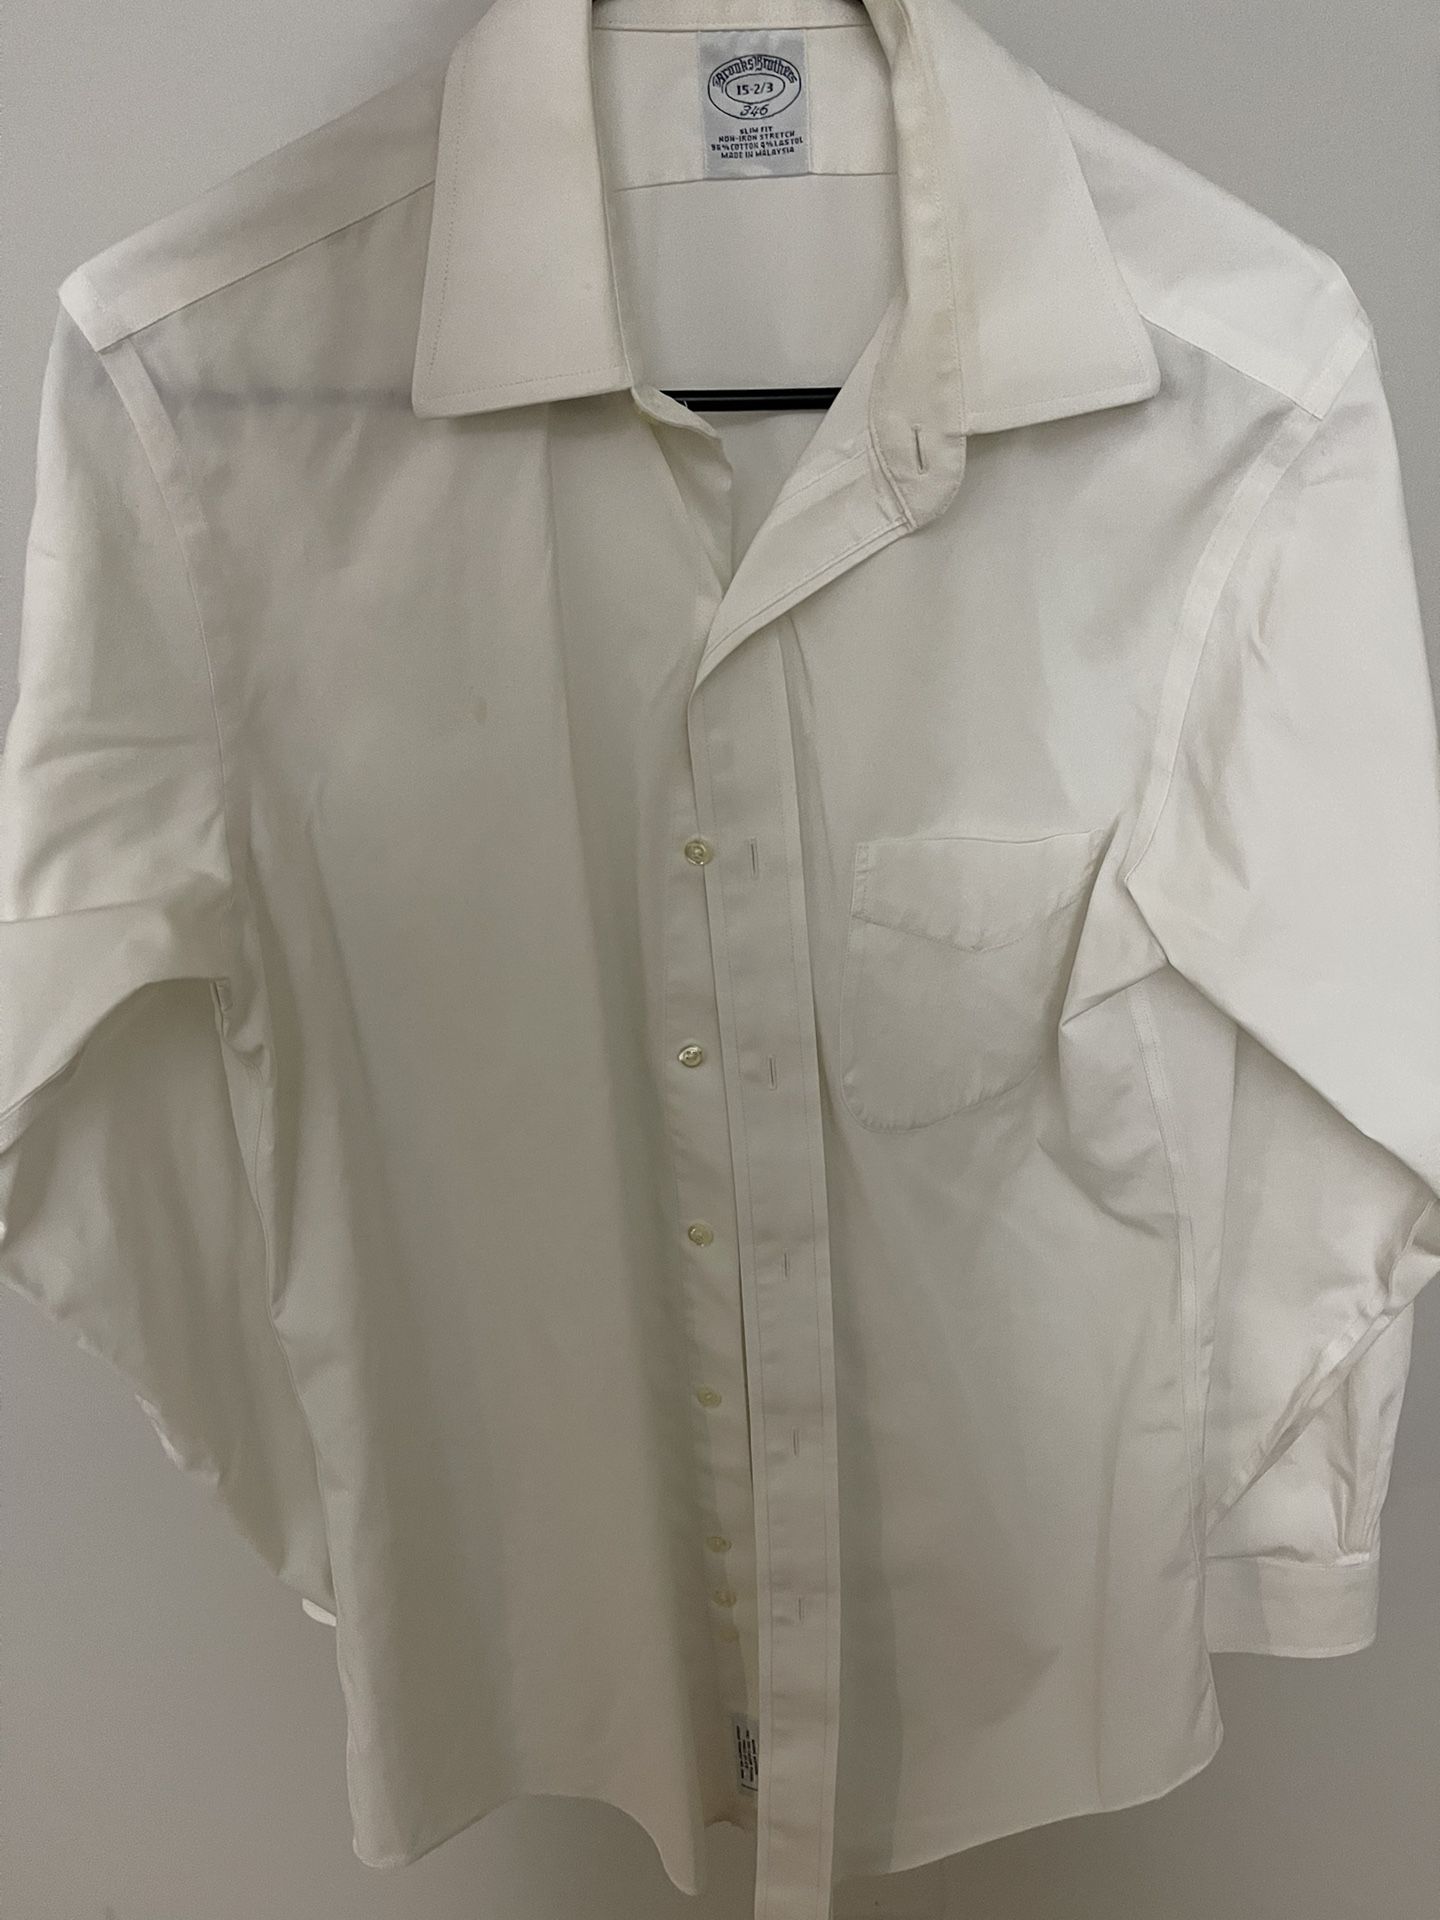 Brooks Brothers 346 Button Up Dress Shirt Mens Size 15 -2/3 Slim Fit